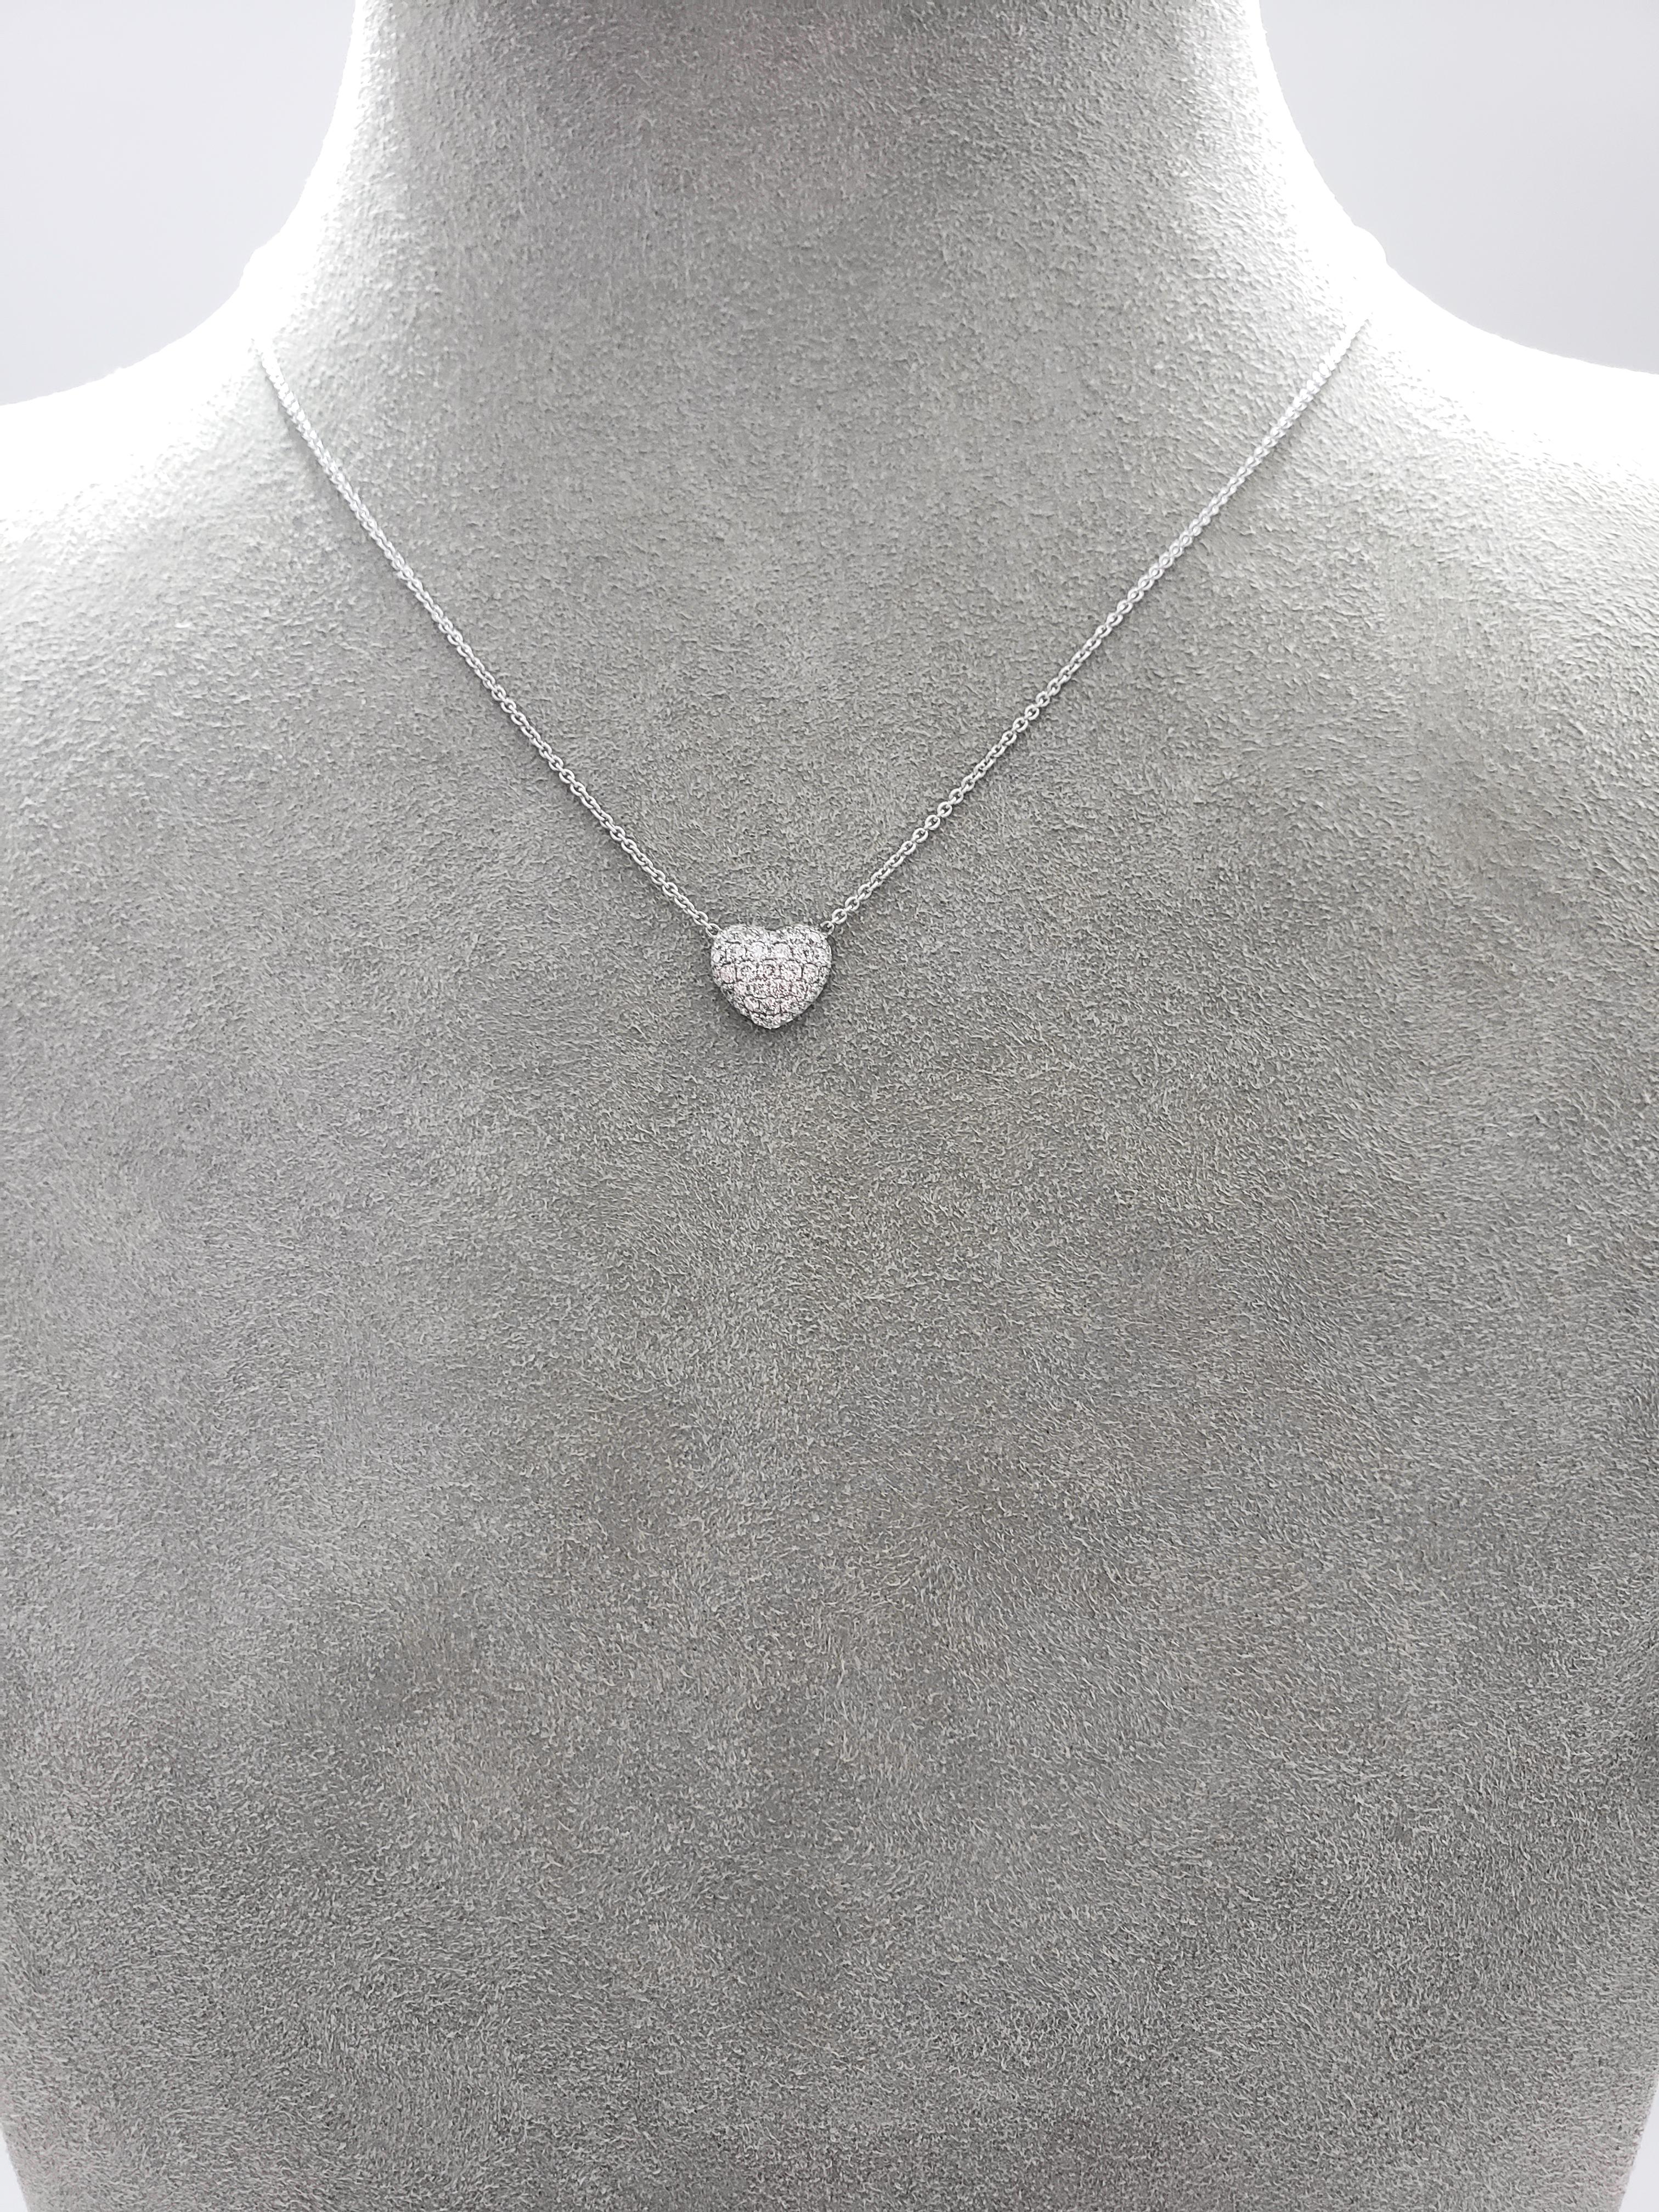 A 3D heart pendant set with micro-pave round diamonds. Diamonds weigh 0.52 carats total. Made in 18 karat white gold. Attached to an 18 inch white gold chain. 

Style available in different price ranges. Prices are based on your selection of the